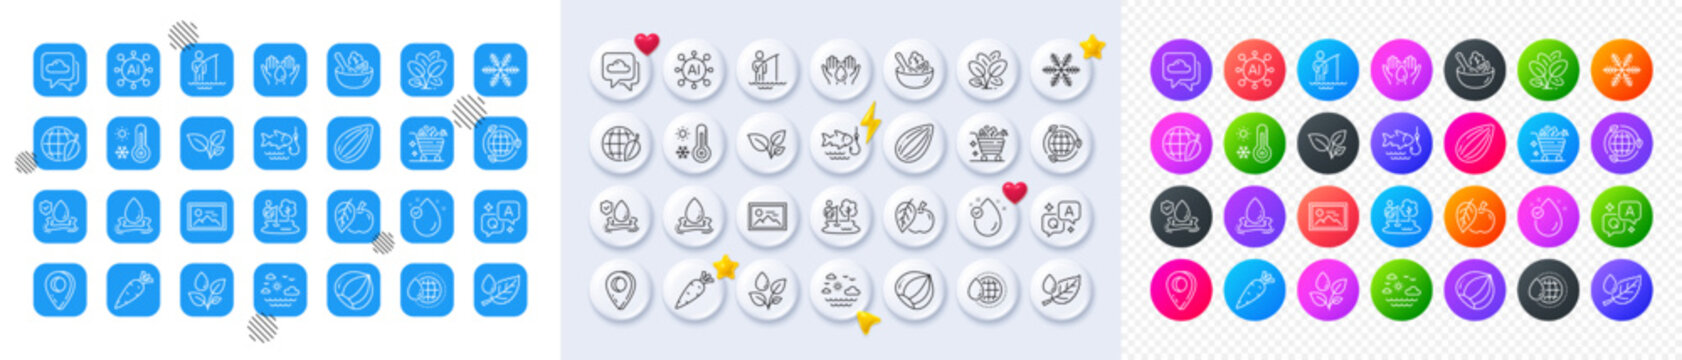 Fisherman, Salad and Water splash line icons. Square, Gradient, Pin 3d buttons. AI, QA and map pin icons. Pack of Hazelnut, Apple, Travel sea icon. Vitamin e, Photo, Leaf dew pictogram. Vector